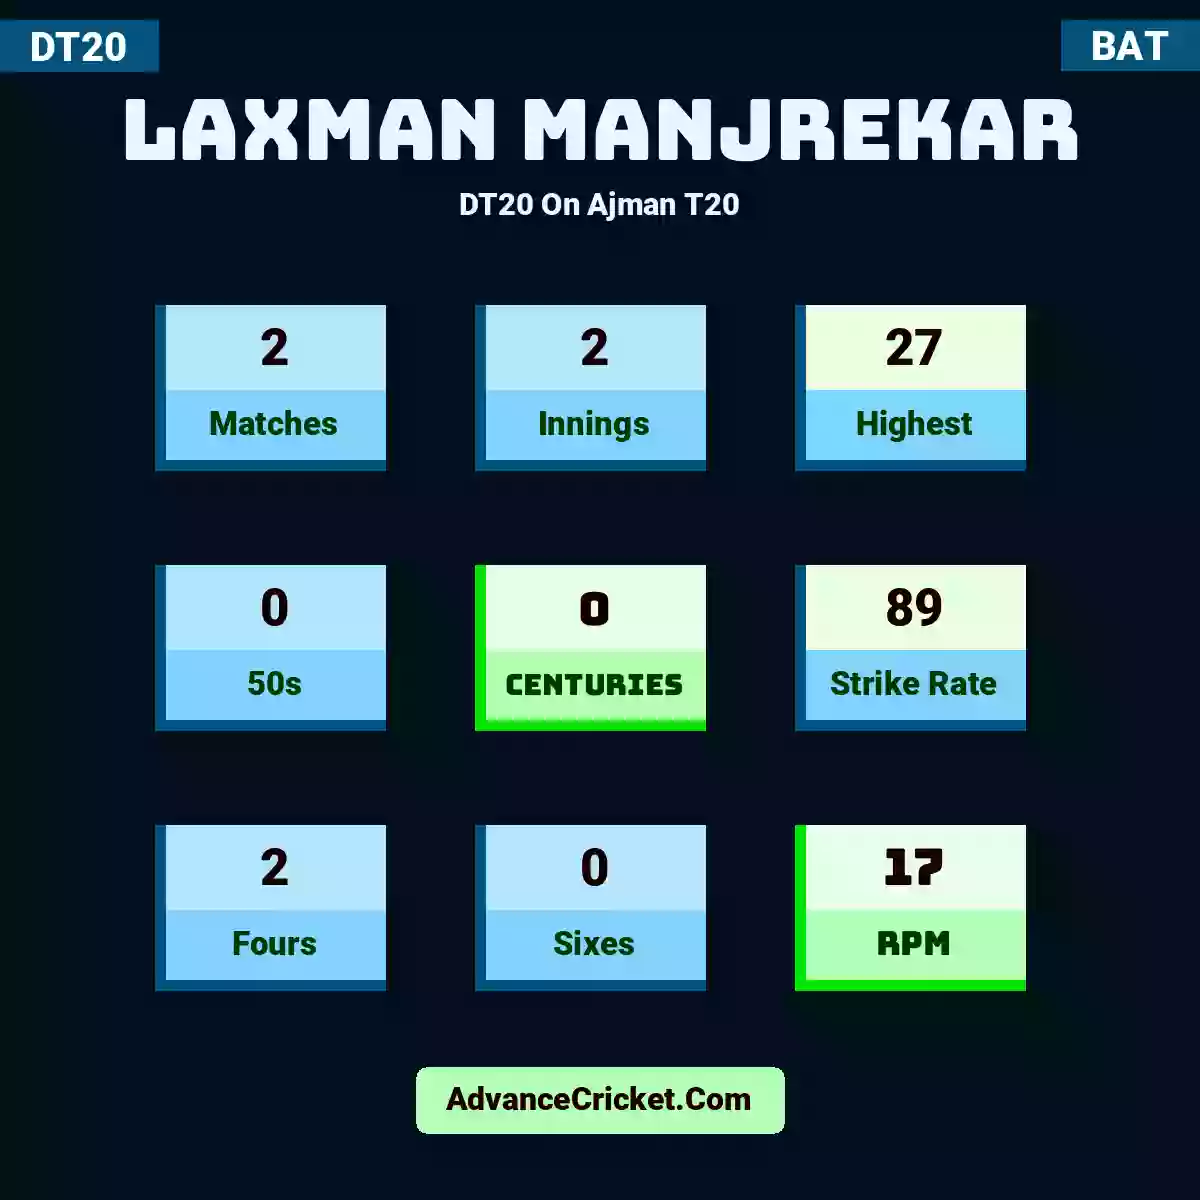 Laxman Manjrekar DT20  On Ajman T20, Laxman Manjrekar played 2 matches, scored 27 runs as highest, 0 half-centuries, and 0 centuries, with a strike rate of 89. L.Manjrekar hit 2 fours and 0 sixes, with an RPM of 17.